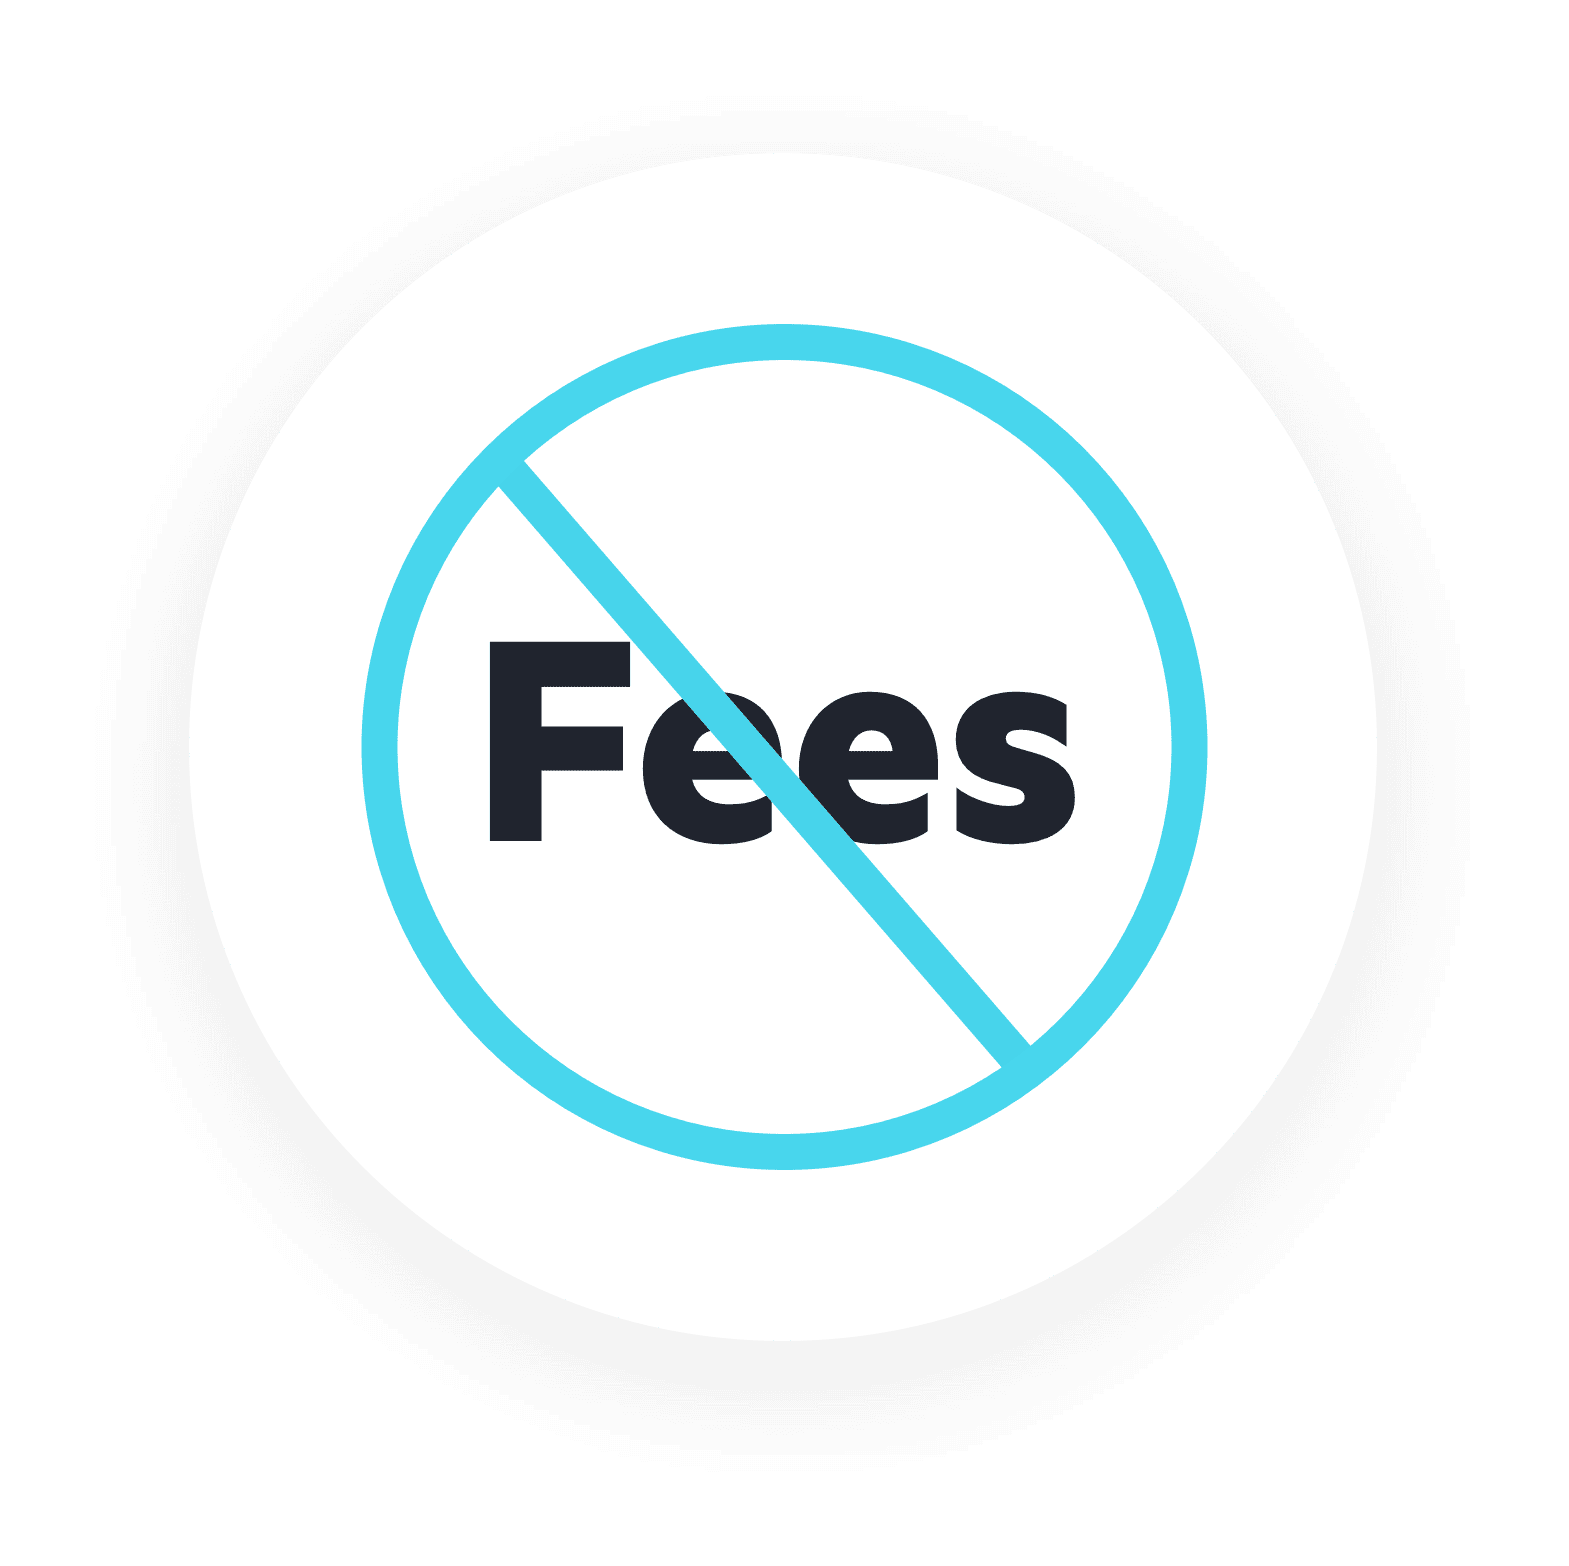 Lili offers banking with no fees